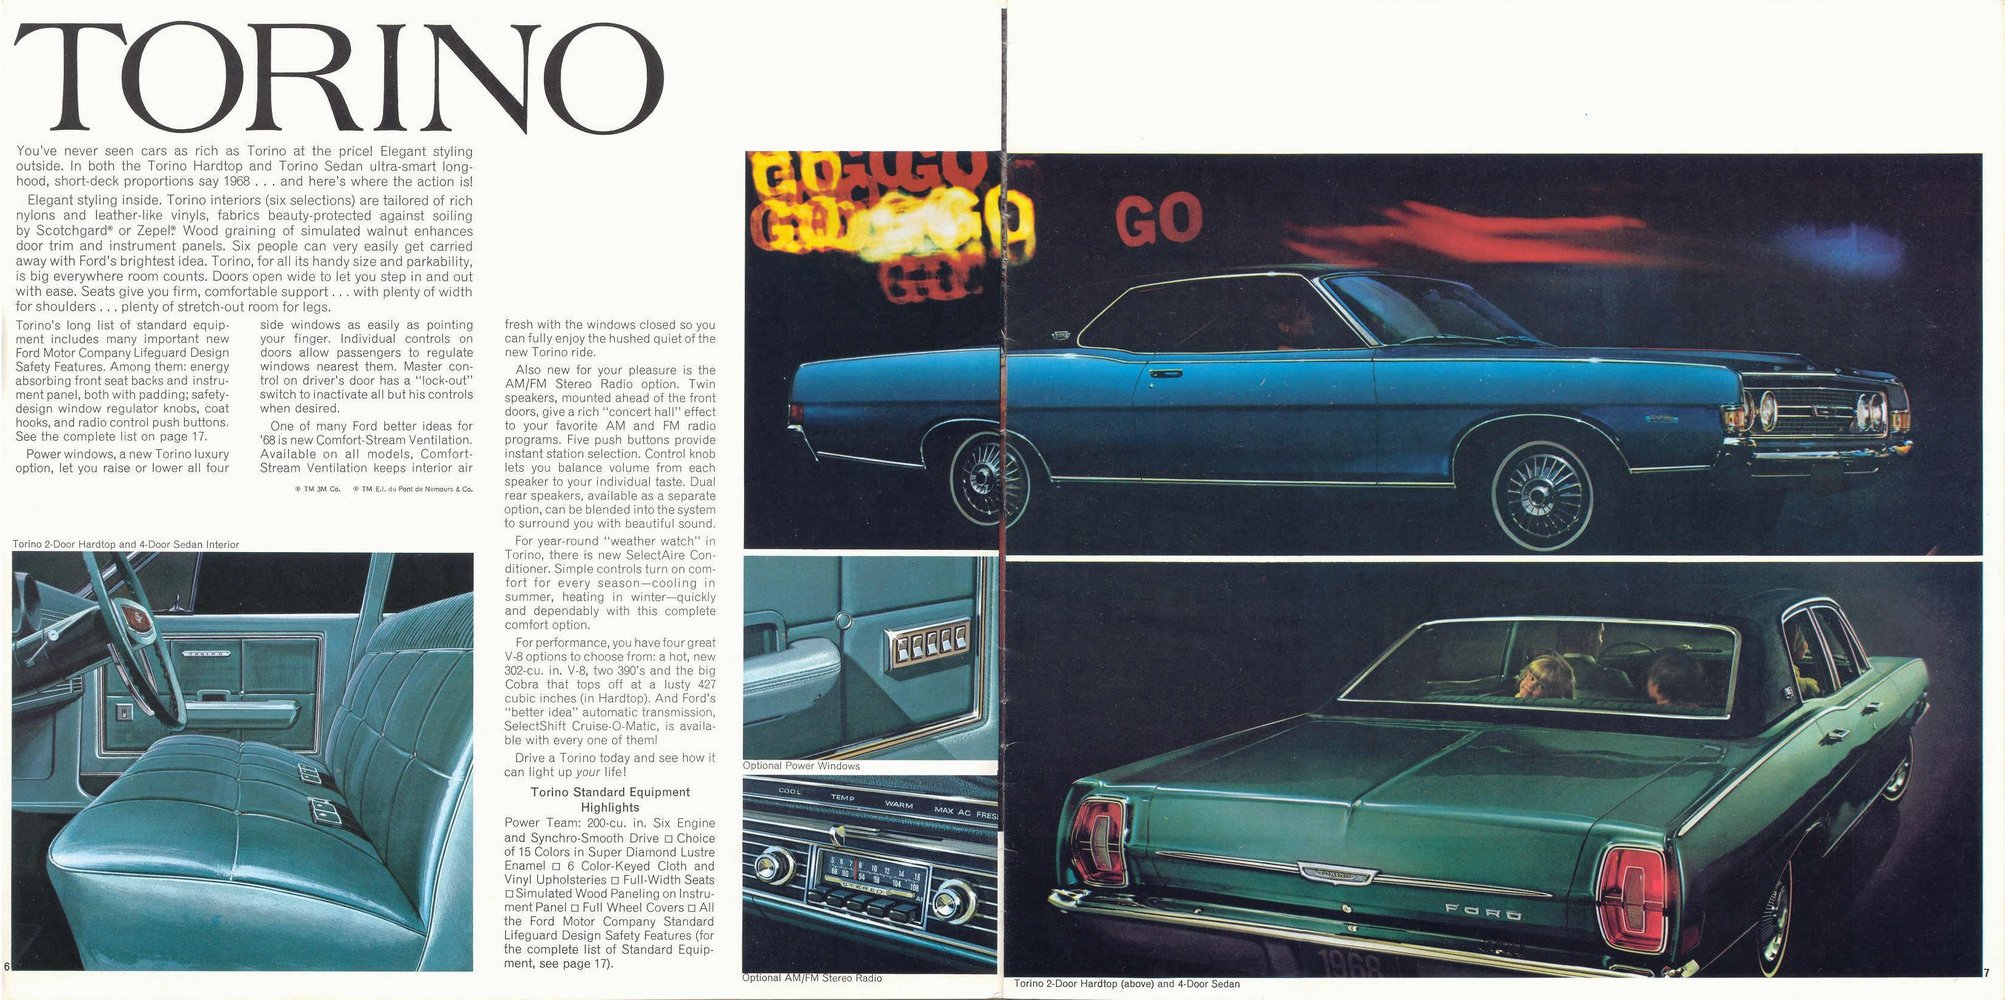 1968 Ford Torino Brochure Page 3